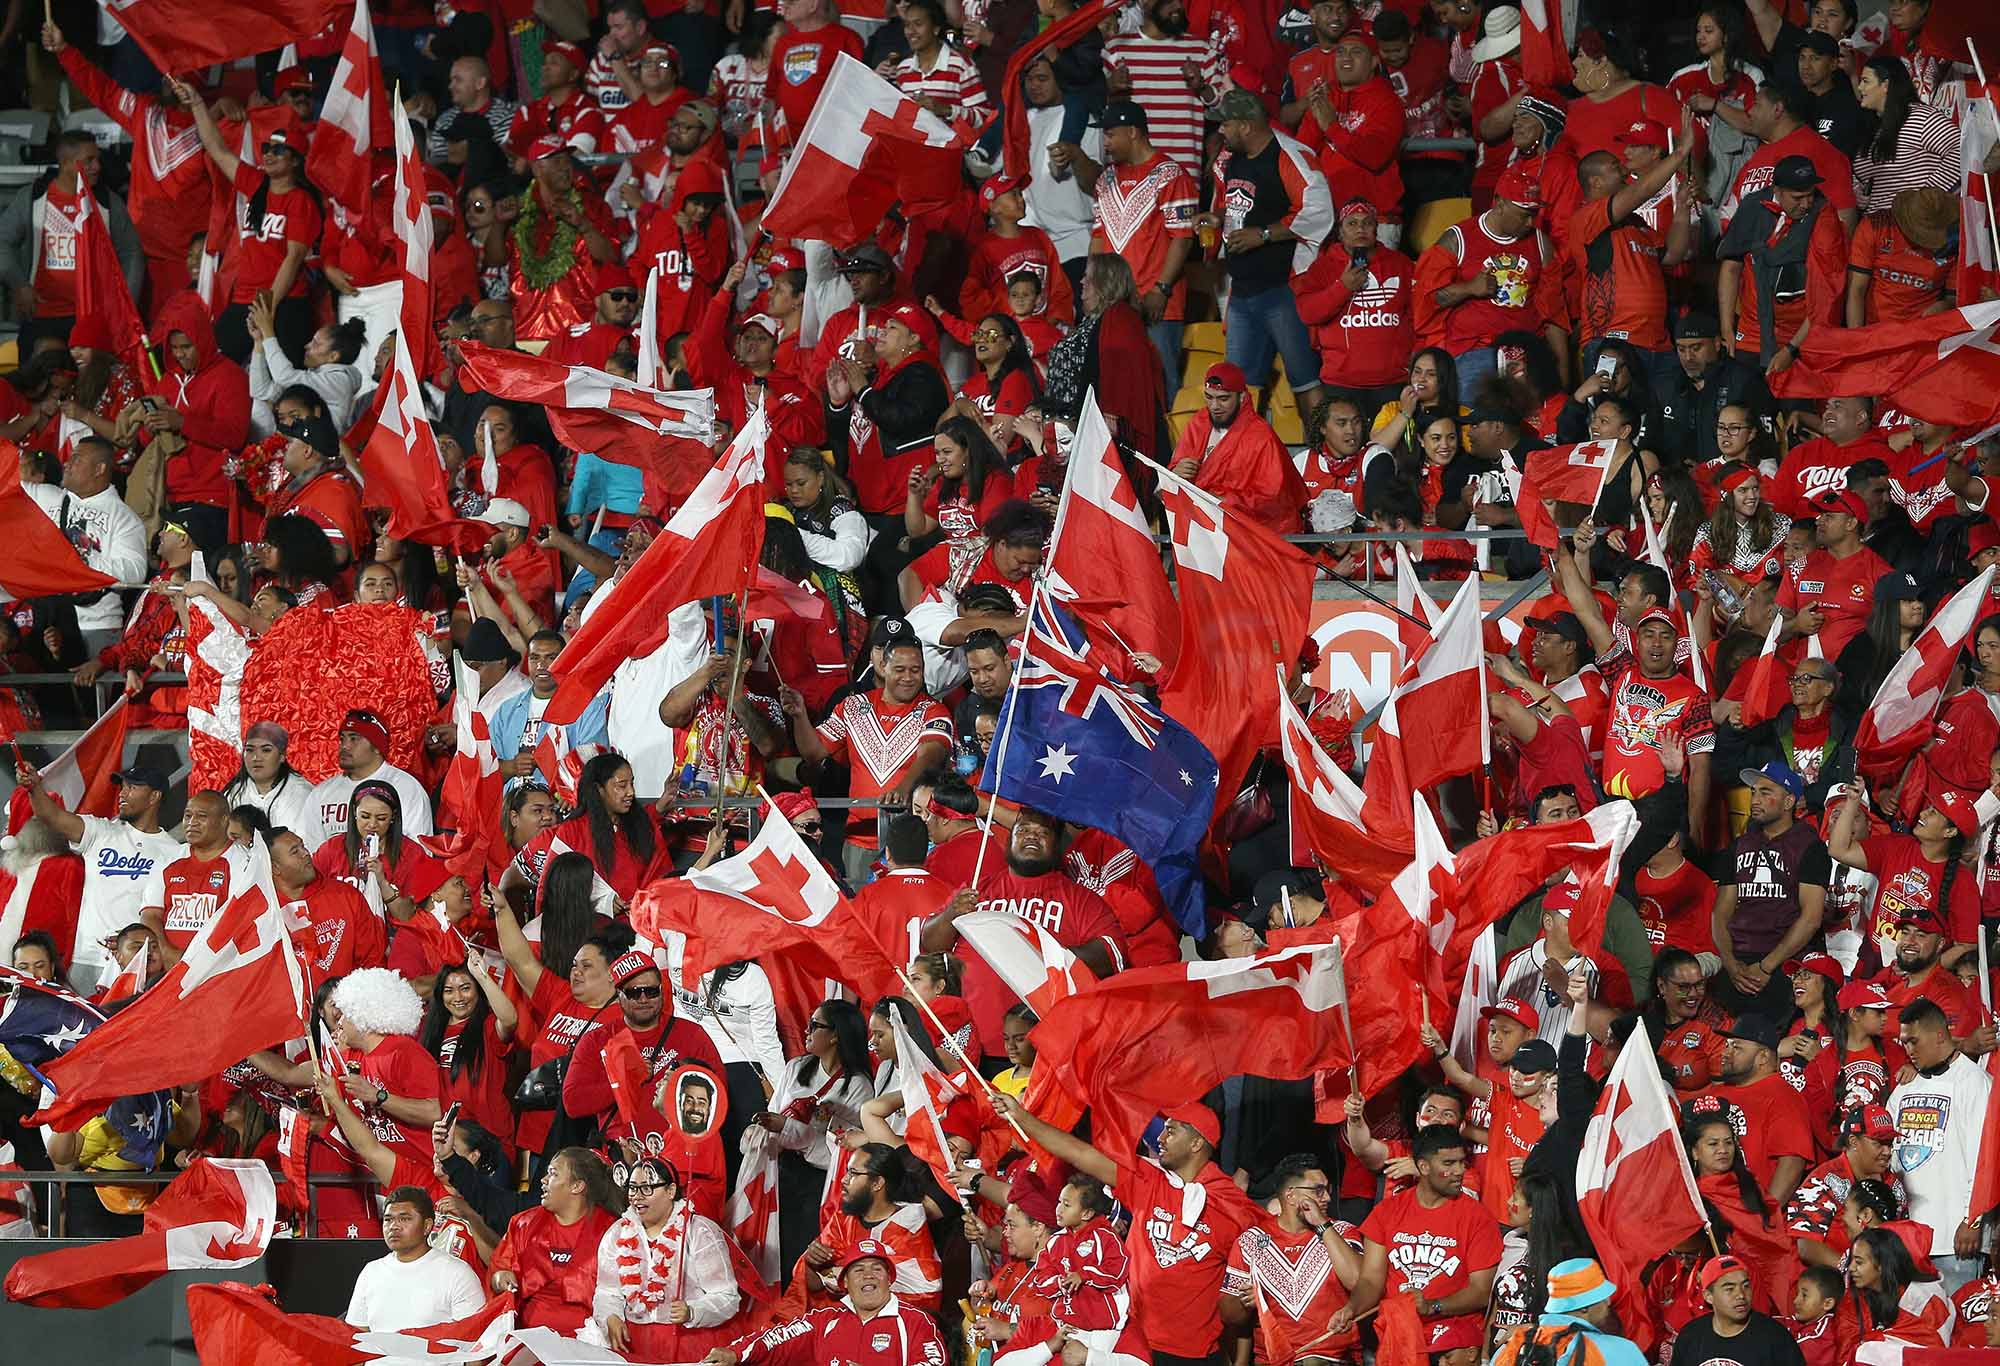 Tongan fans in the crowd